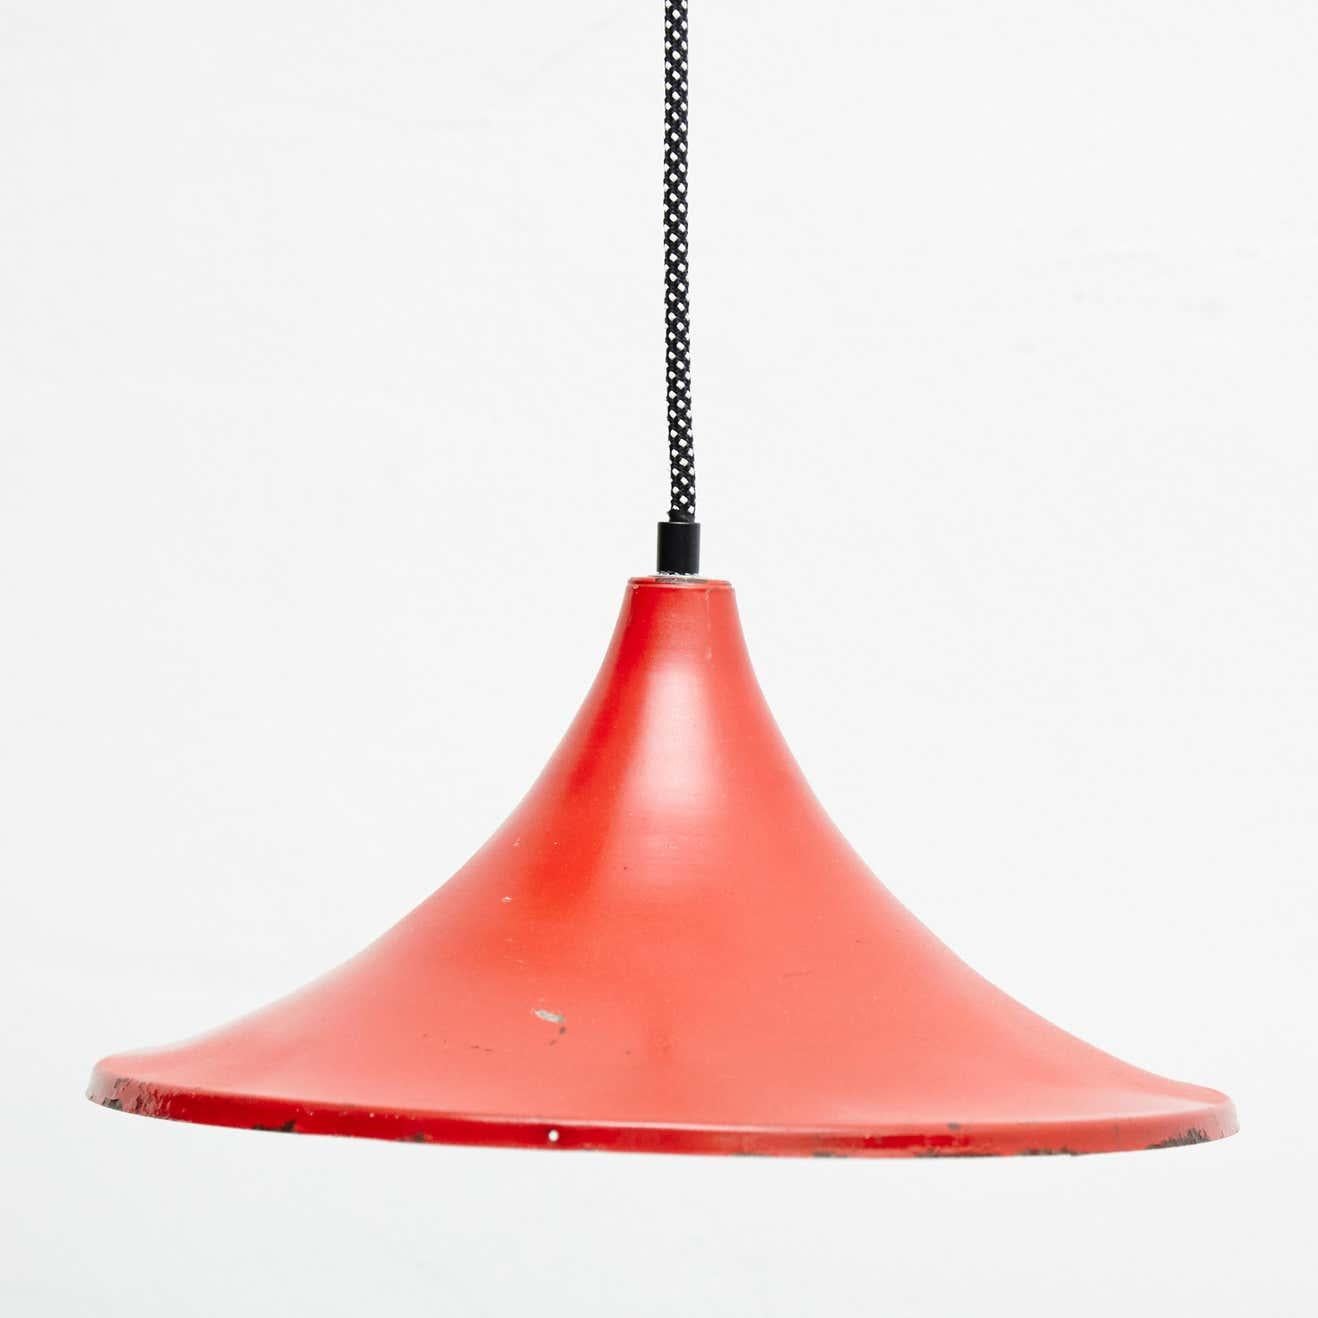 Early 20th century antique red metal ceiling lamp.
By unknown manufacturer, France.

In original condition, with minor wear consistent with age and use, preserving a beautiful patina.

Materials:
Lacquered metal

Dimensions:
ø 32 cm x H 15